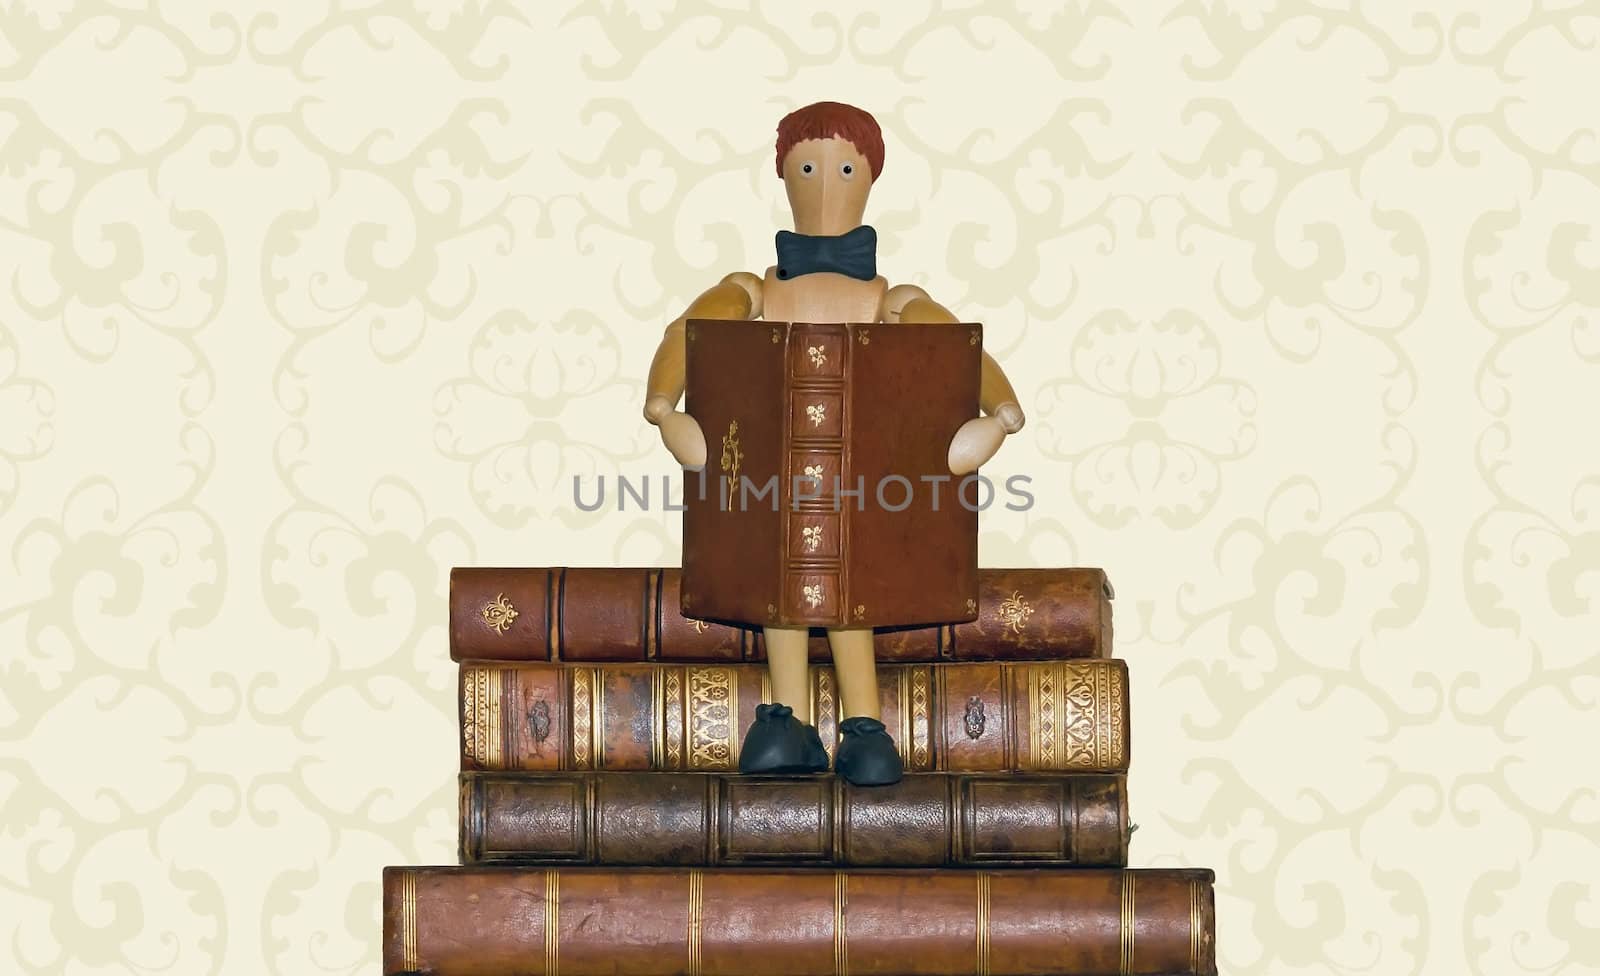 Reader, wooden snowman, sitting on pile of books